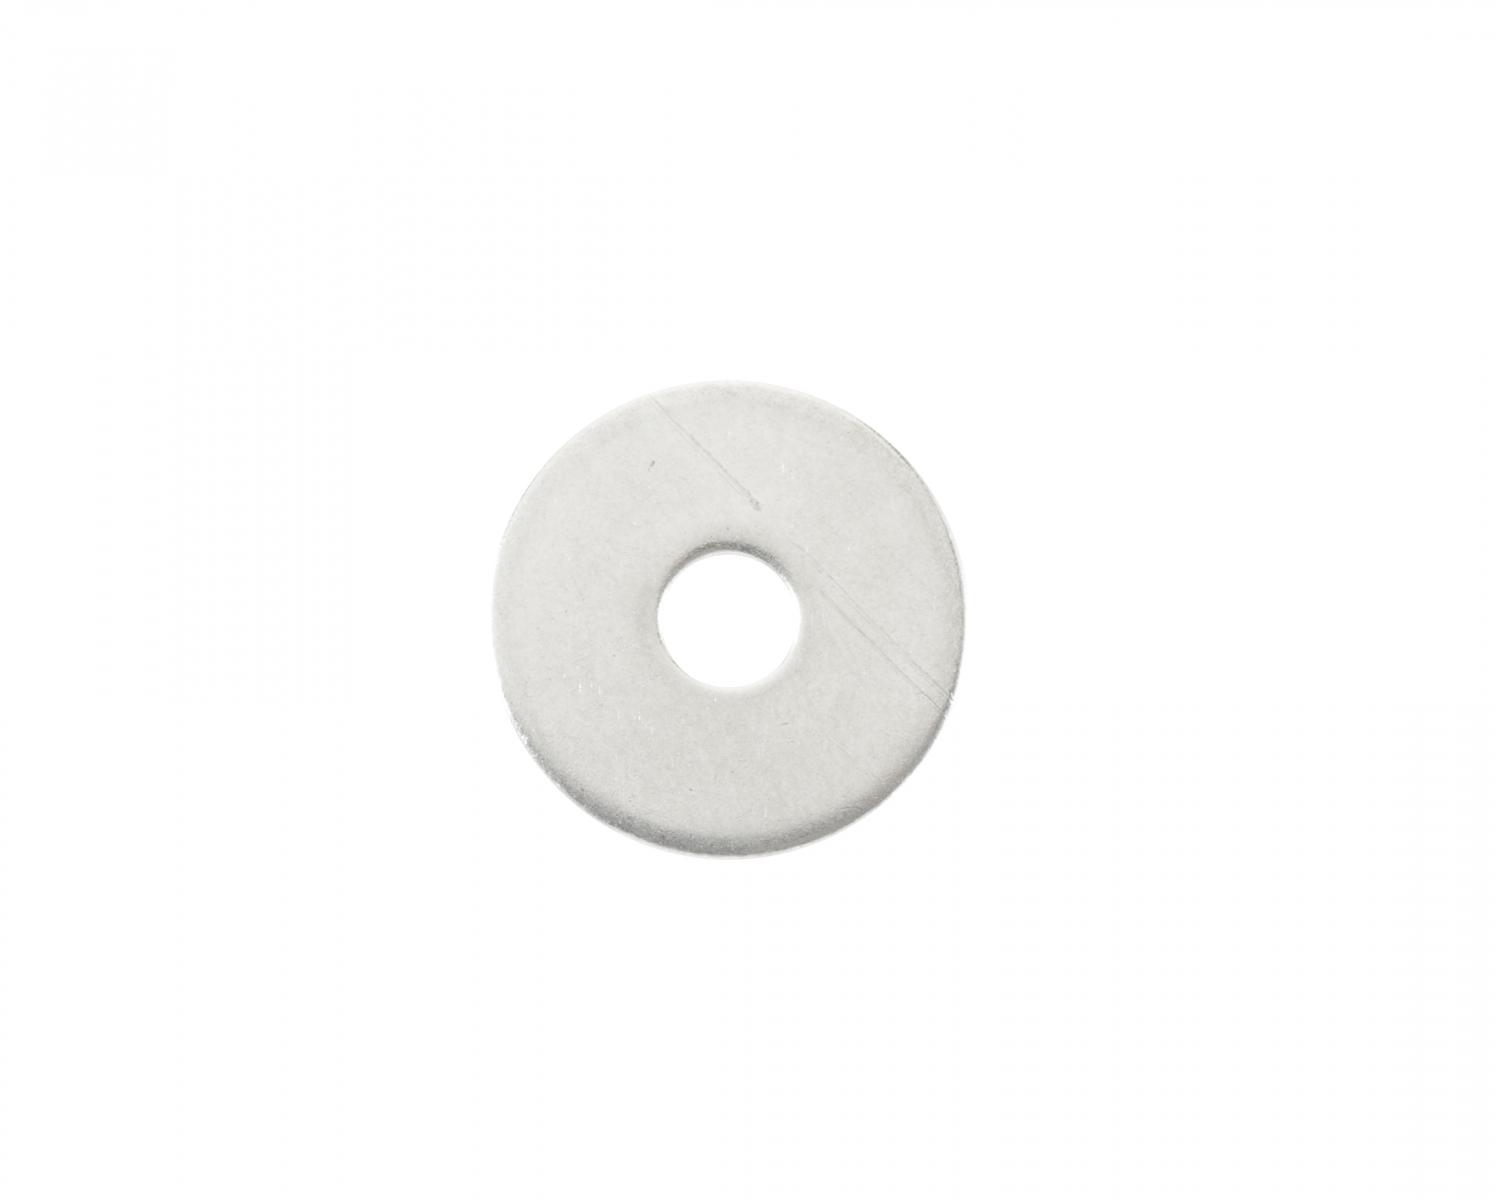  Foot Valve Washer. Part number P-29